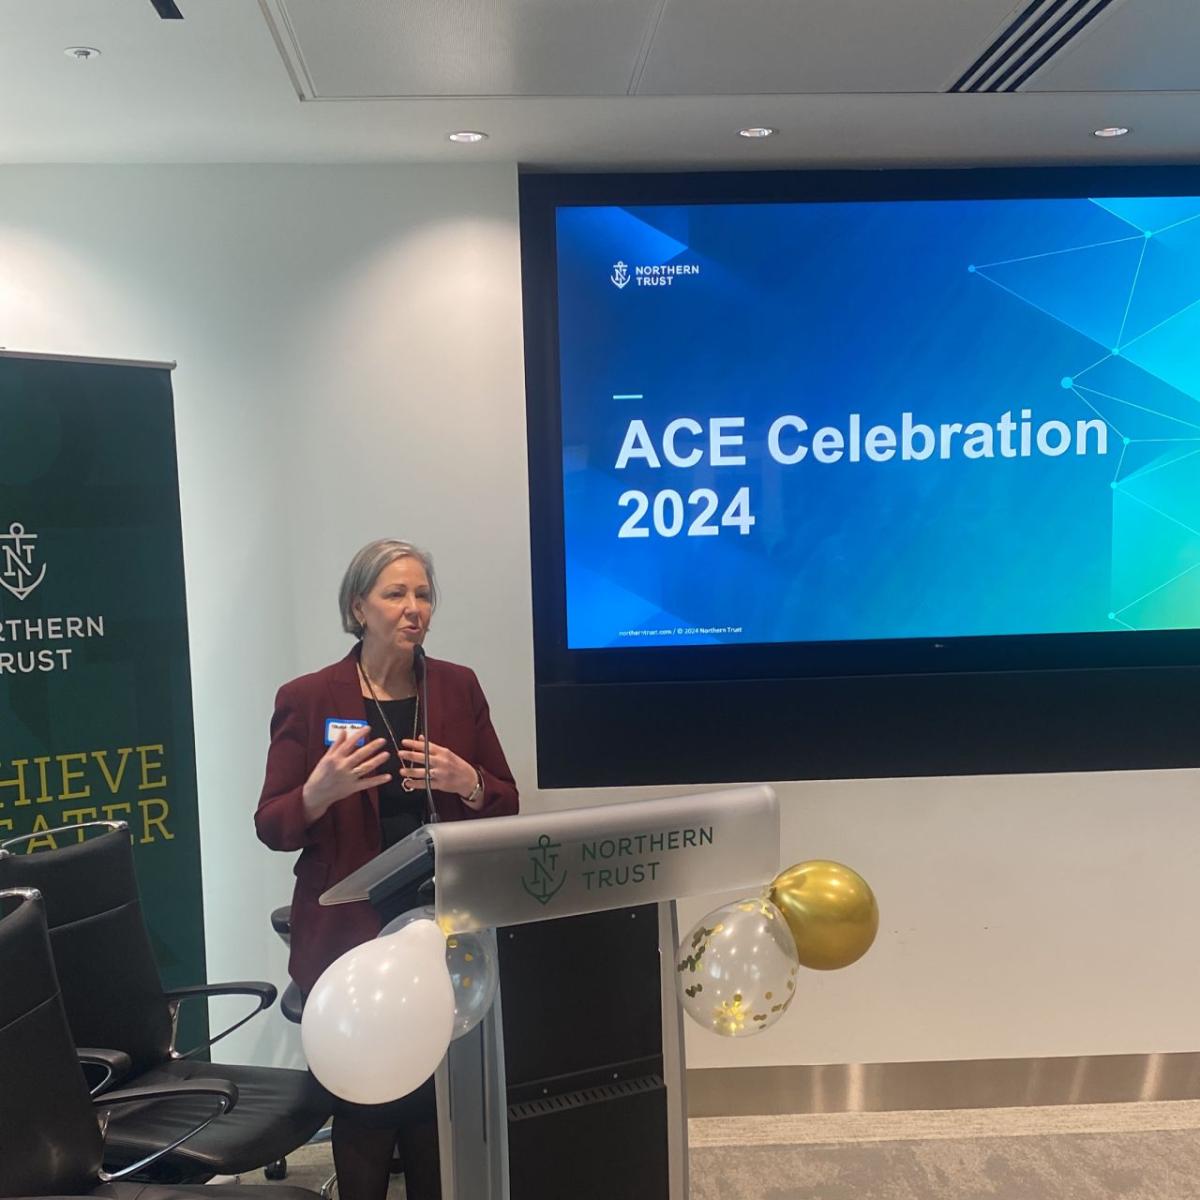 A person speaking at the ACE celebration 2024 event